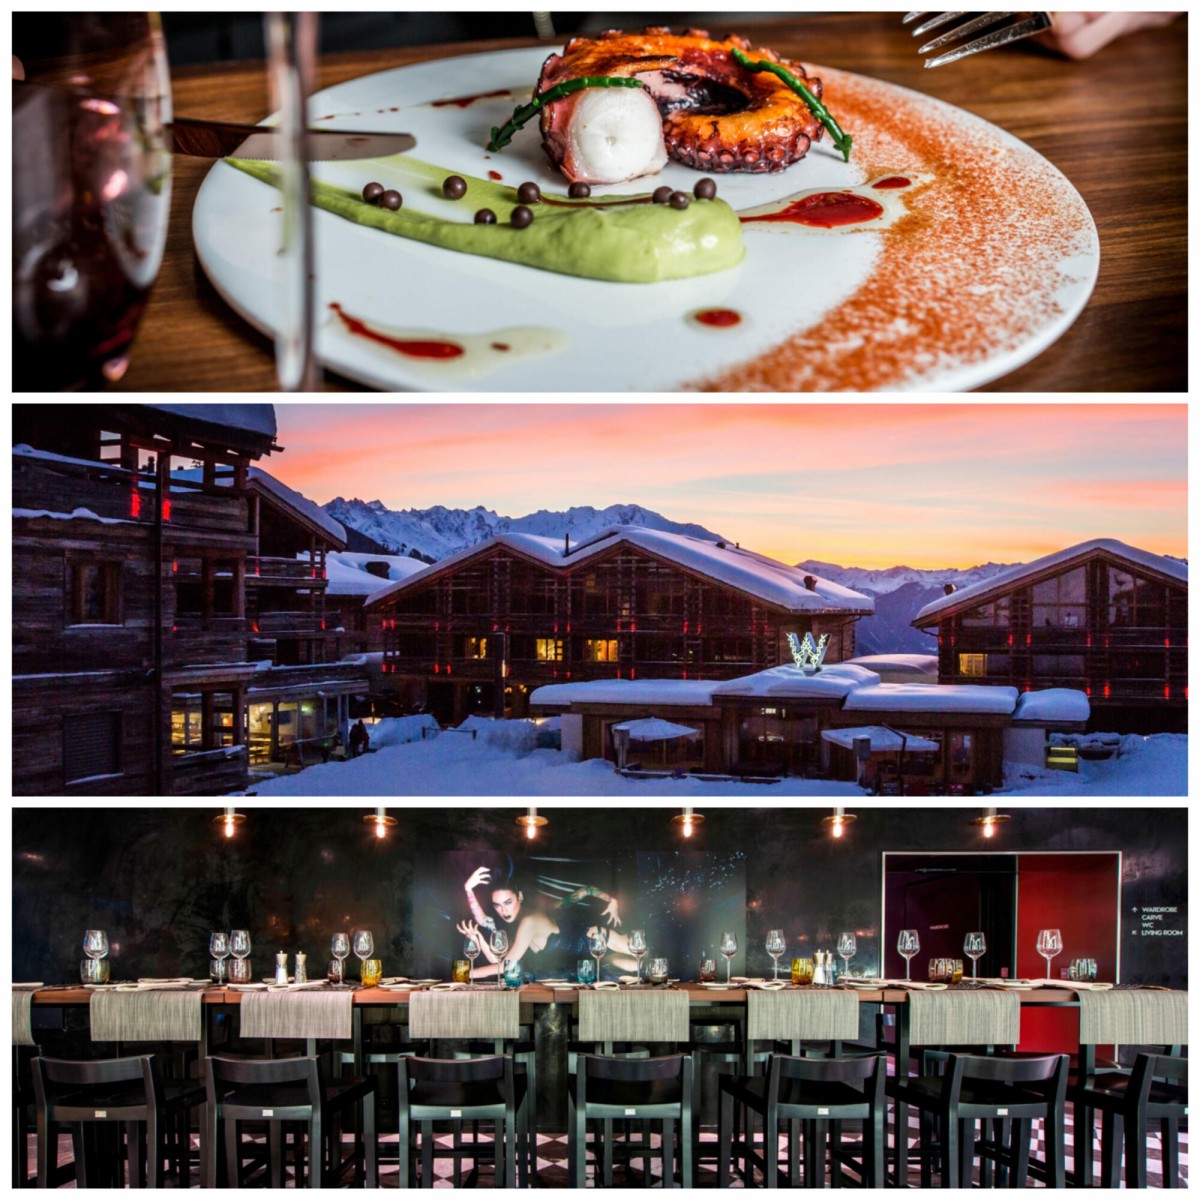 W Verbier – EAT HOLA Tapas Bar, a gourmet restaurant with a Michelin-starred chef